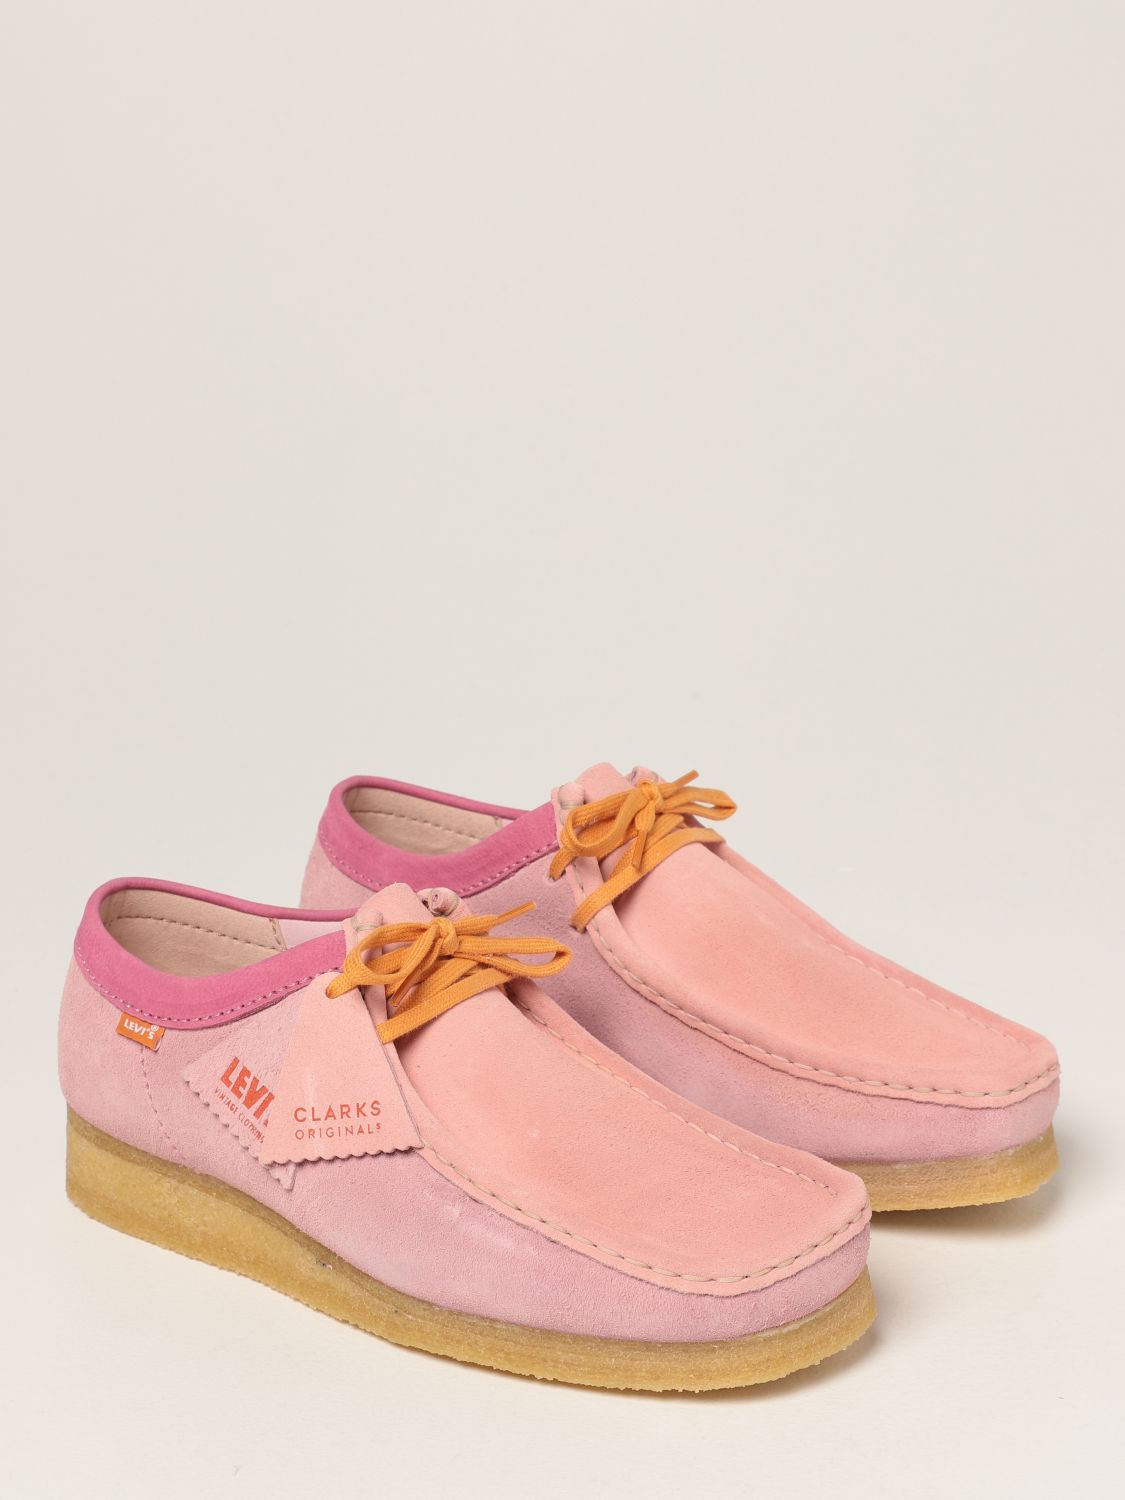 Buy,clarks shoes pink,Exclusive Deals and Offers,admin.gahar.gov.eg